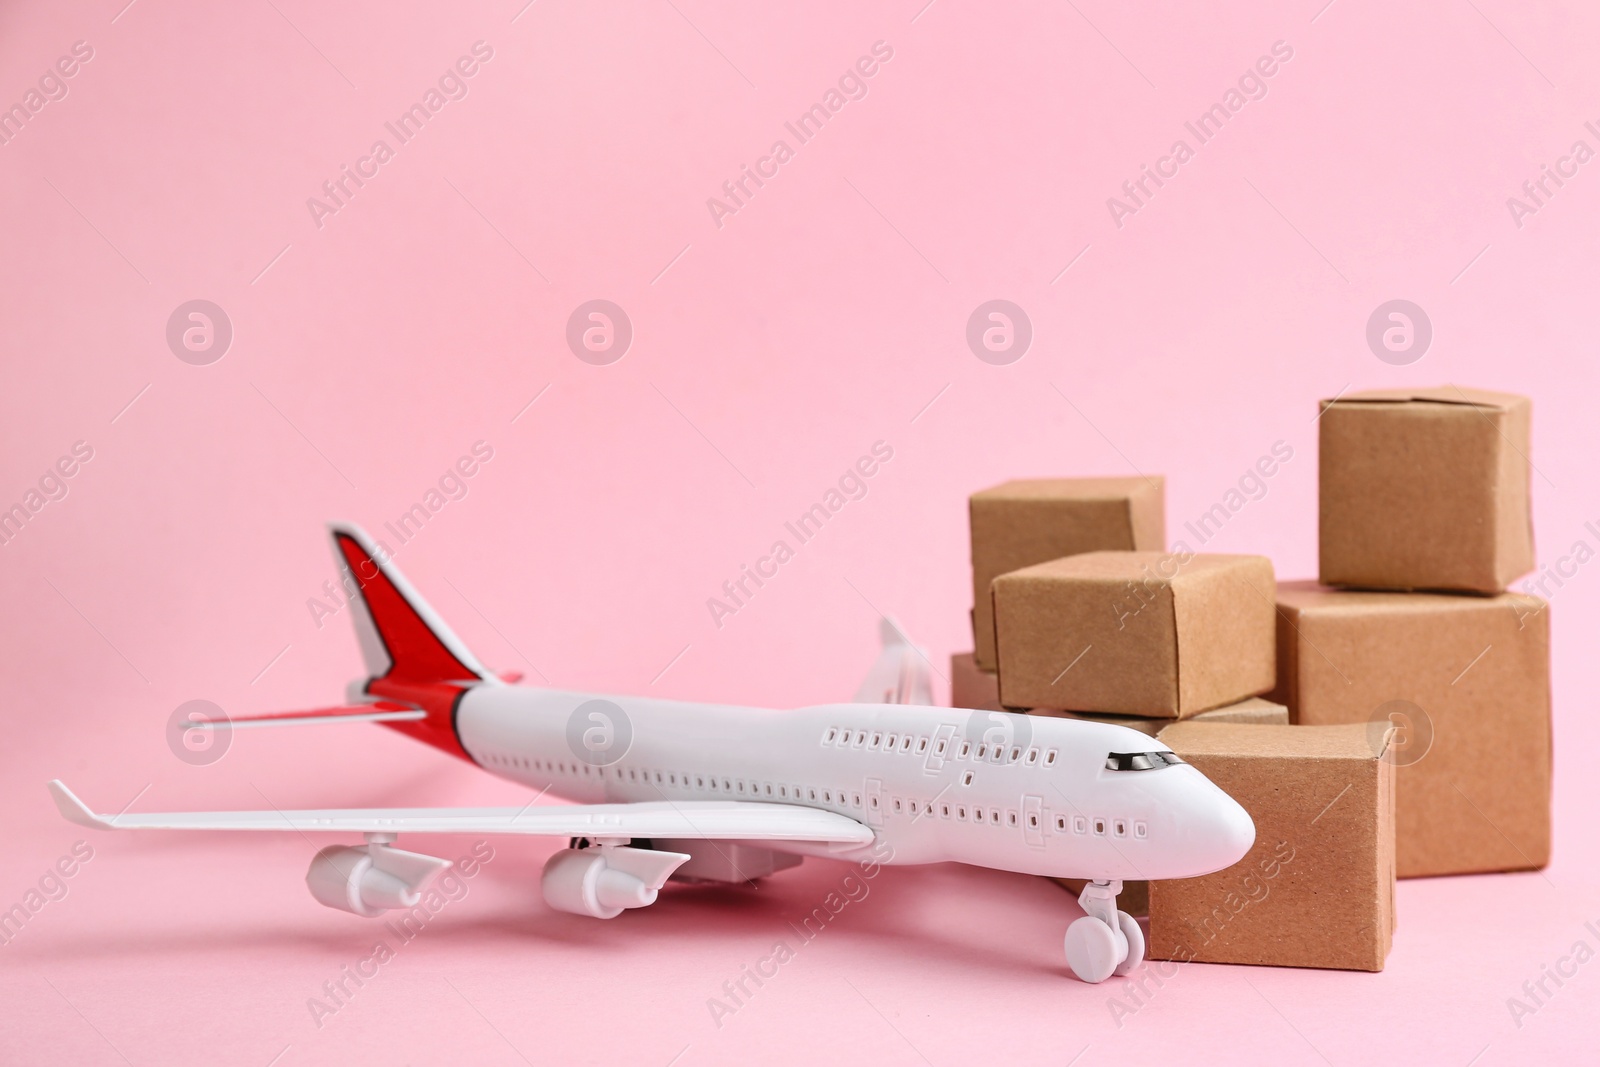 Photo of Airplane model and carton boxes on light pink background. Courier service